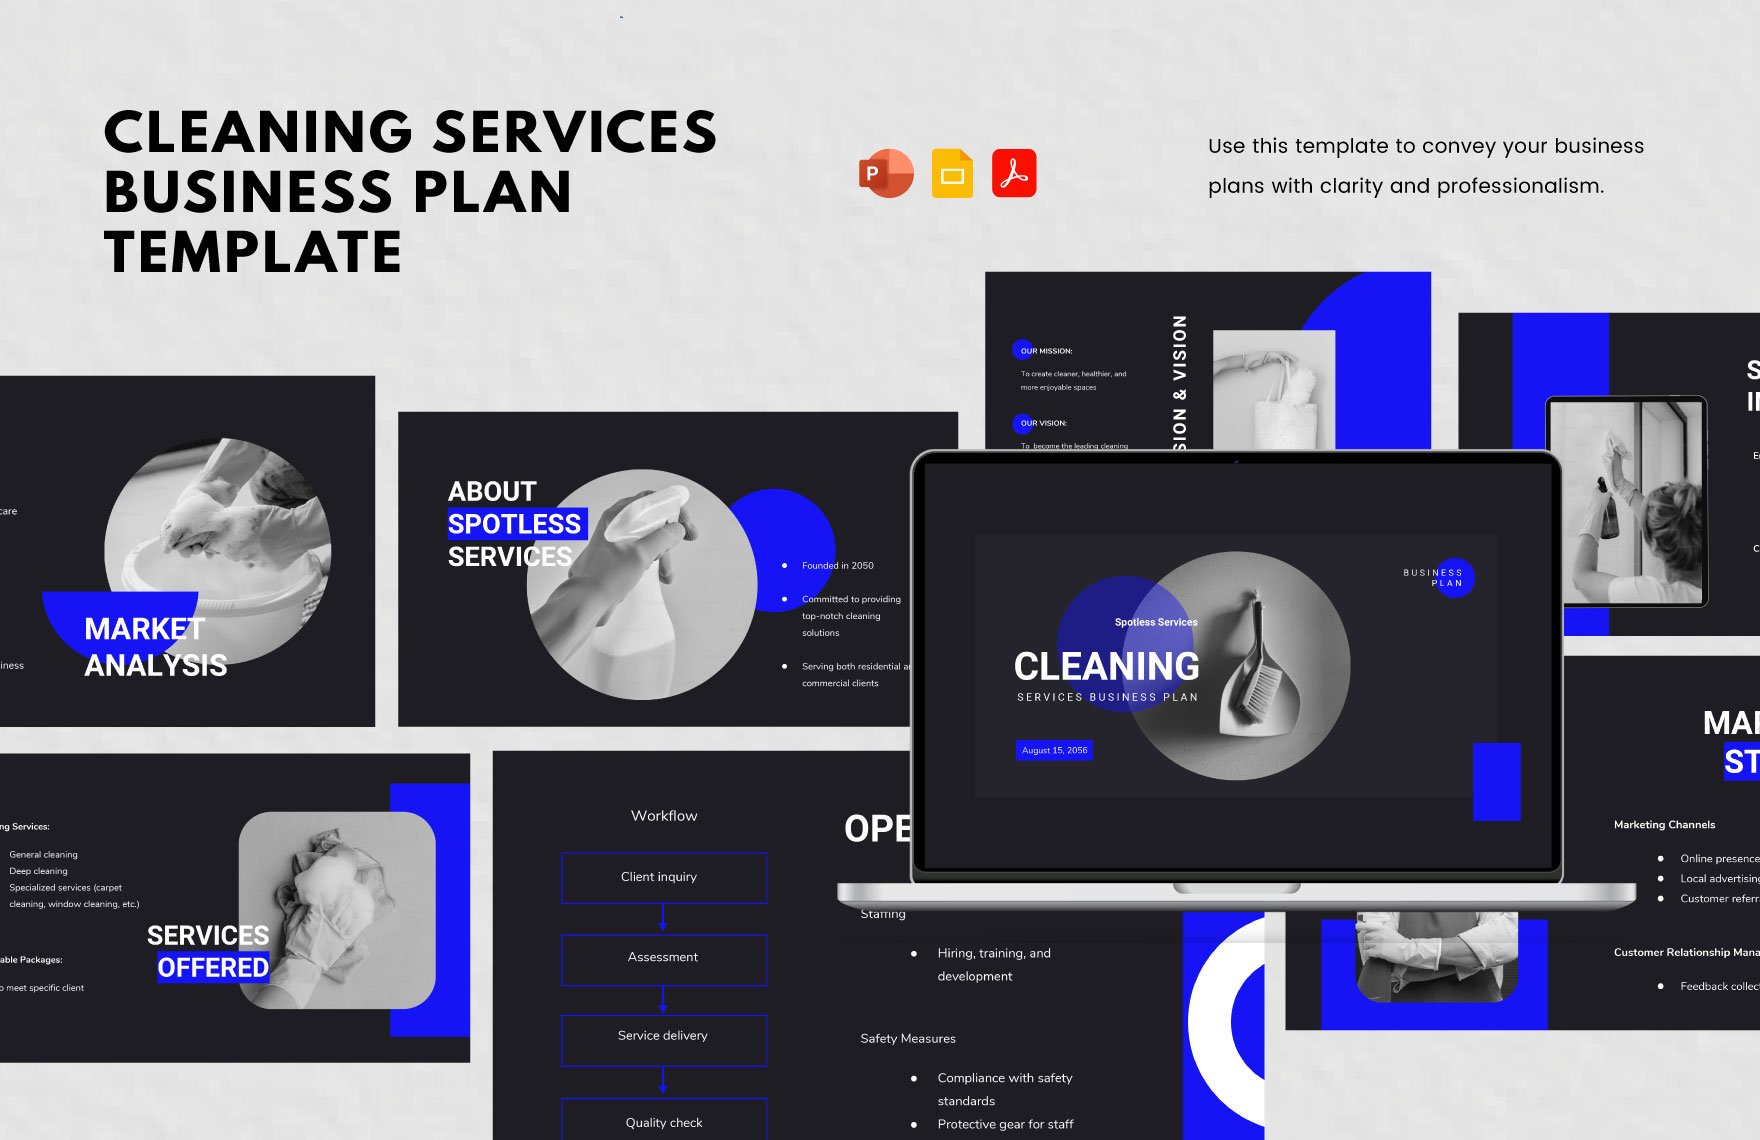 Cleaning Services Business Plan Template in PDF, PowerPoint, Google Slides